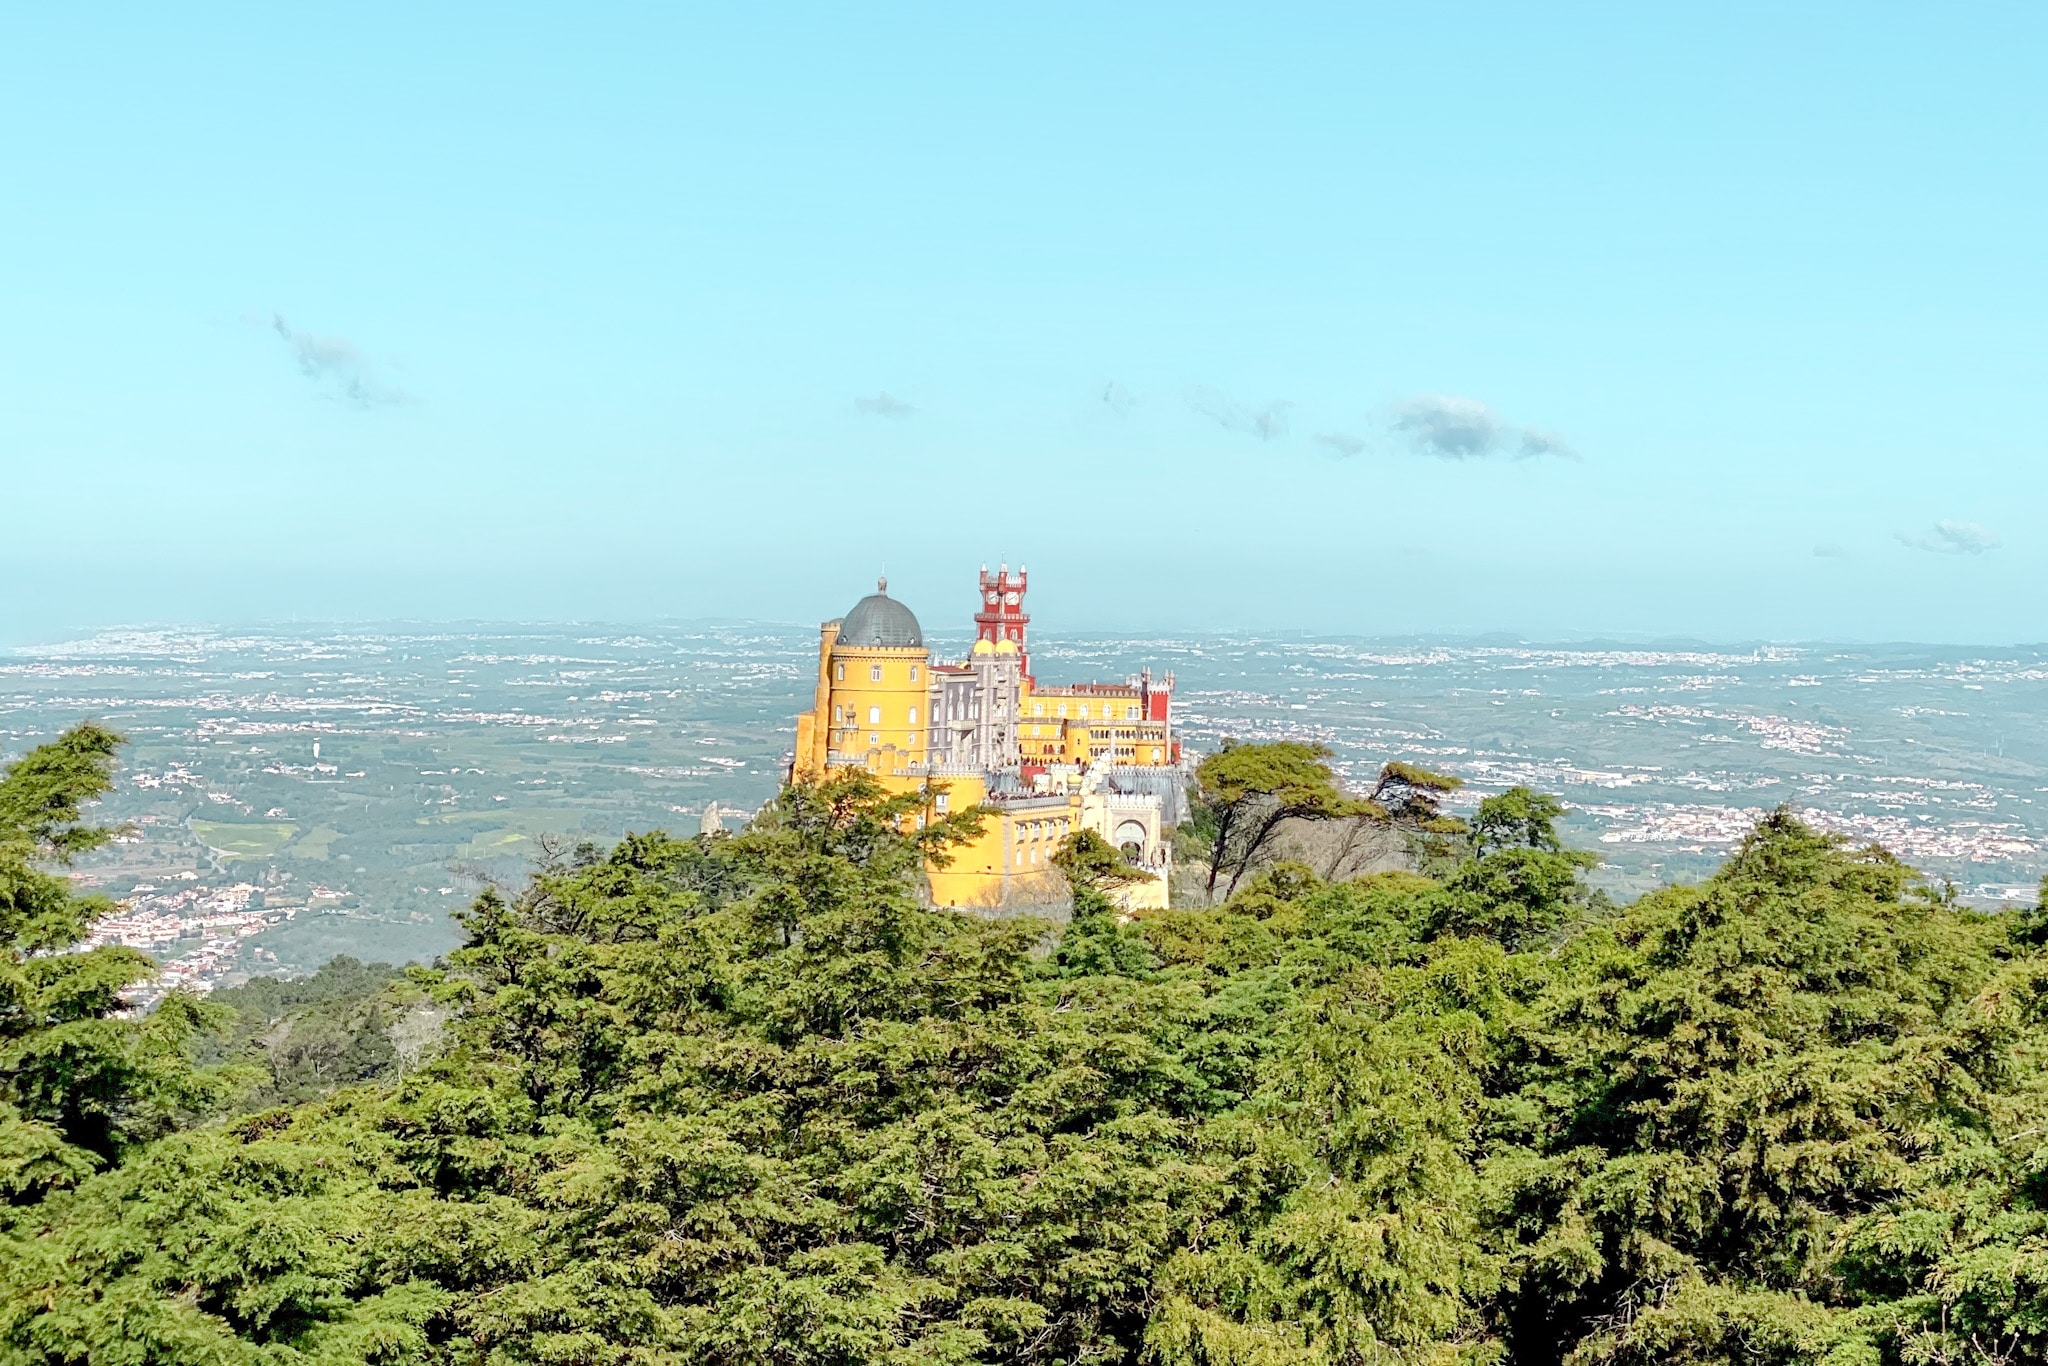 Pena Palace from the High Cross viewpoint in Sintra, Portugal.